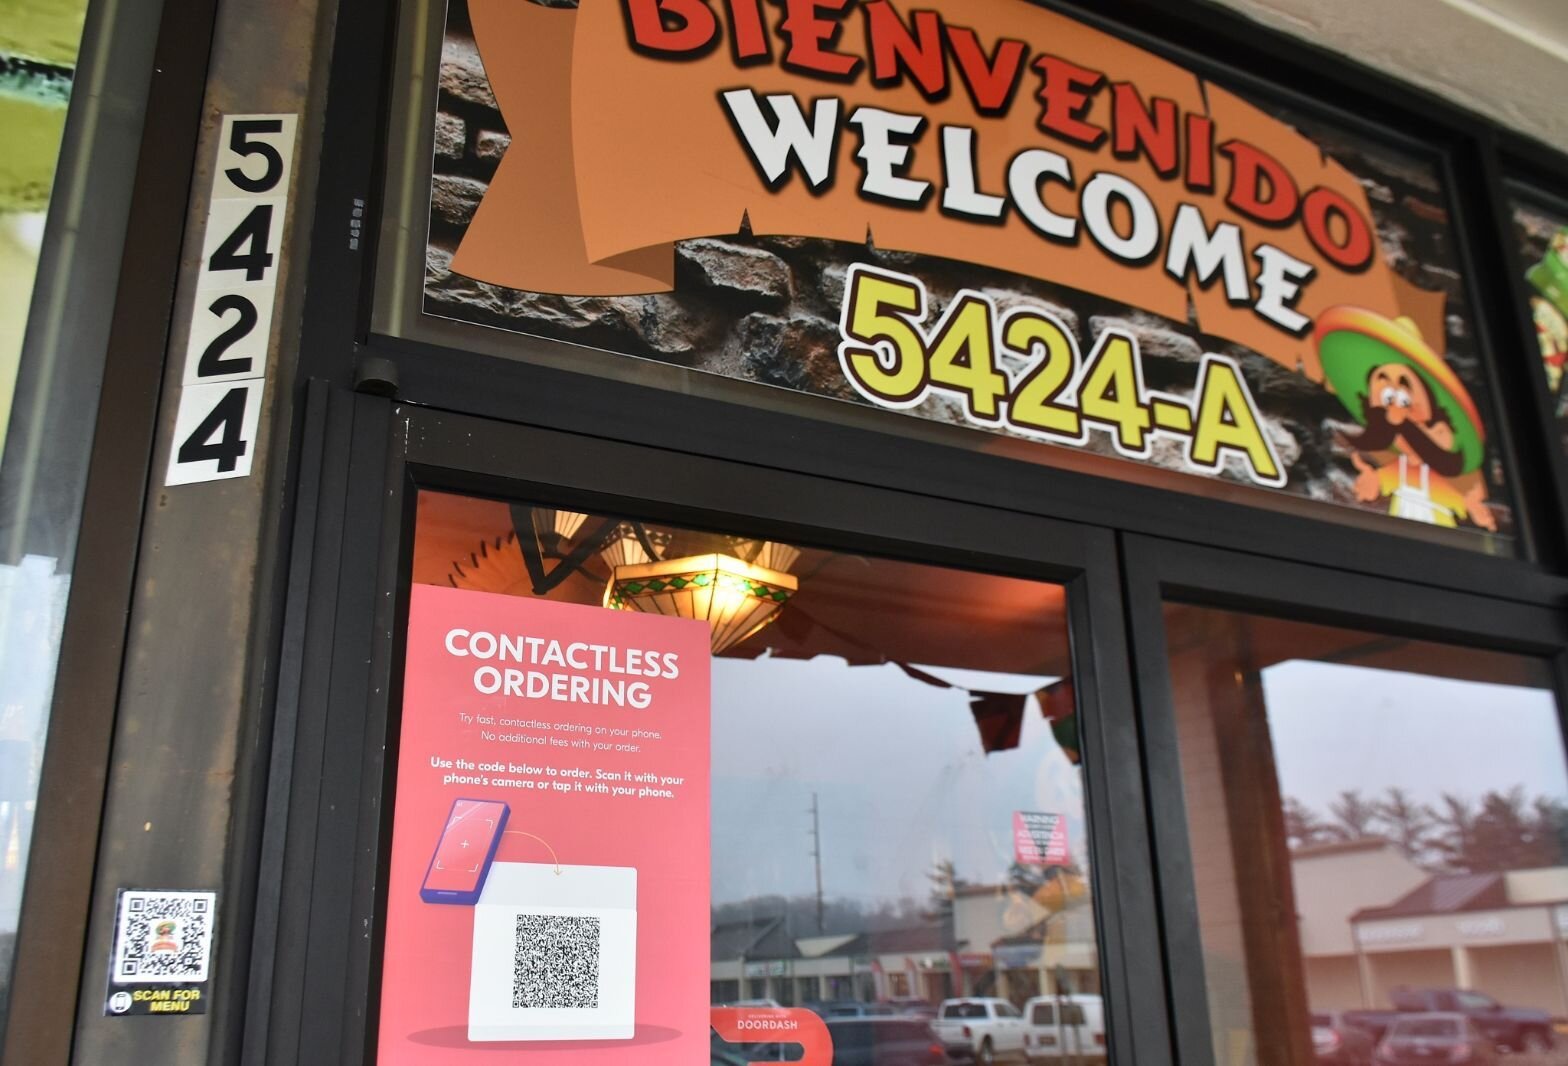 Contactless ordering sign at LaCocina on Beckley Road.